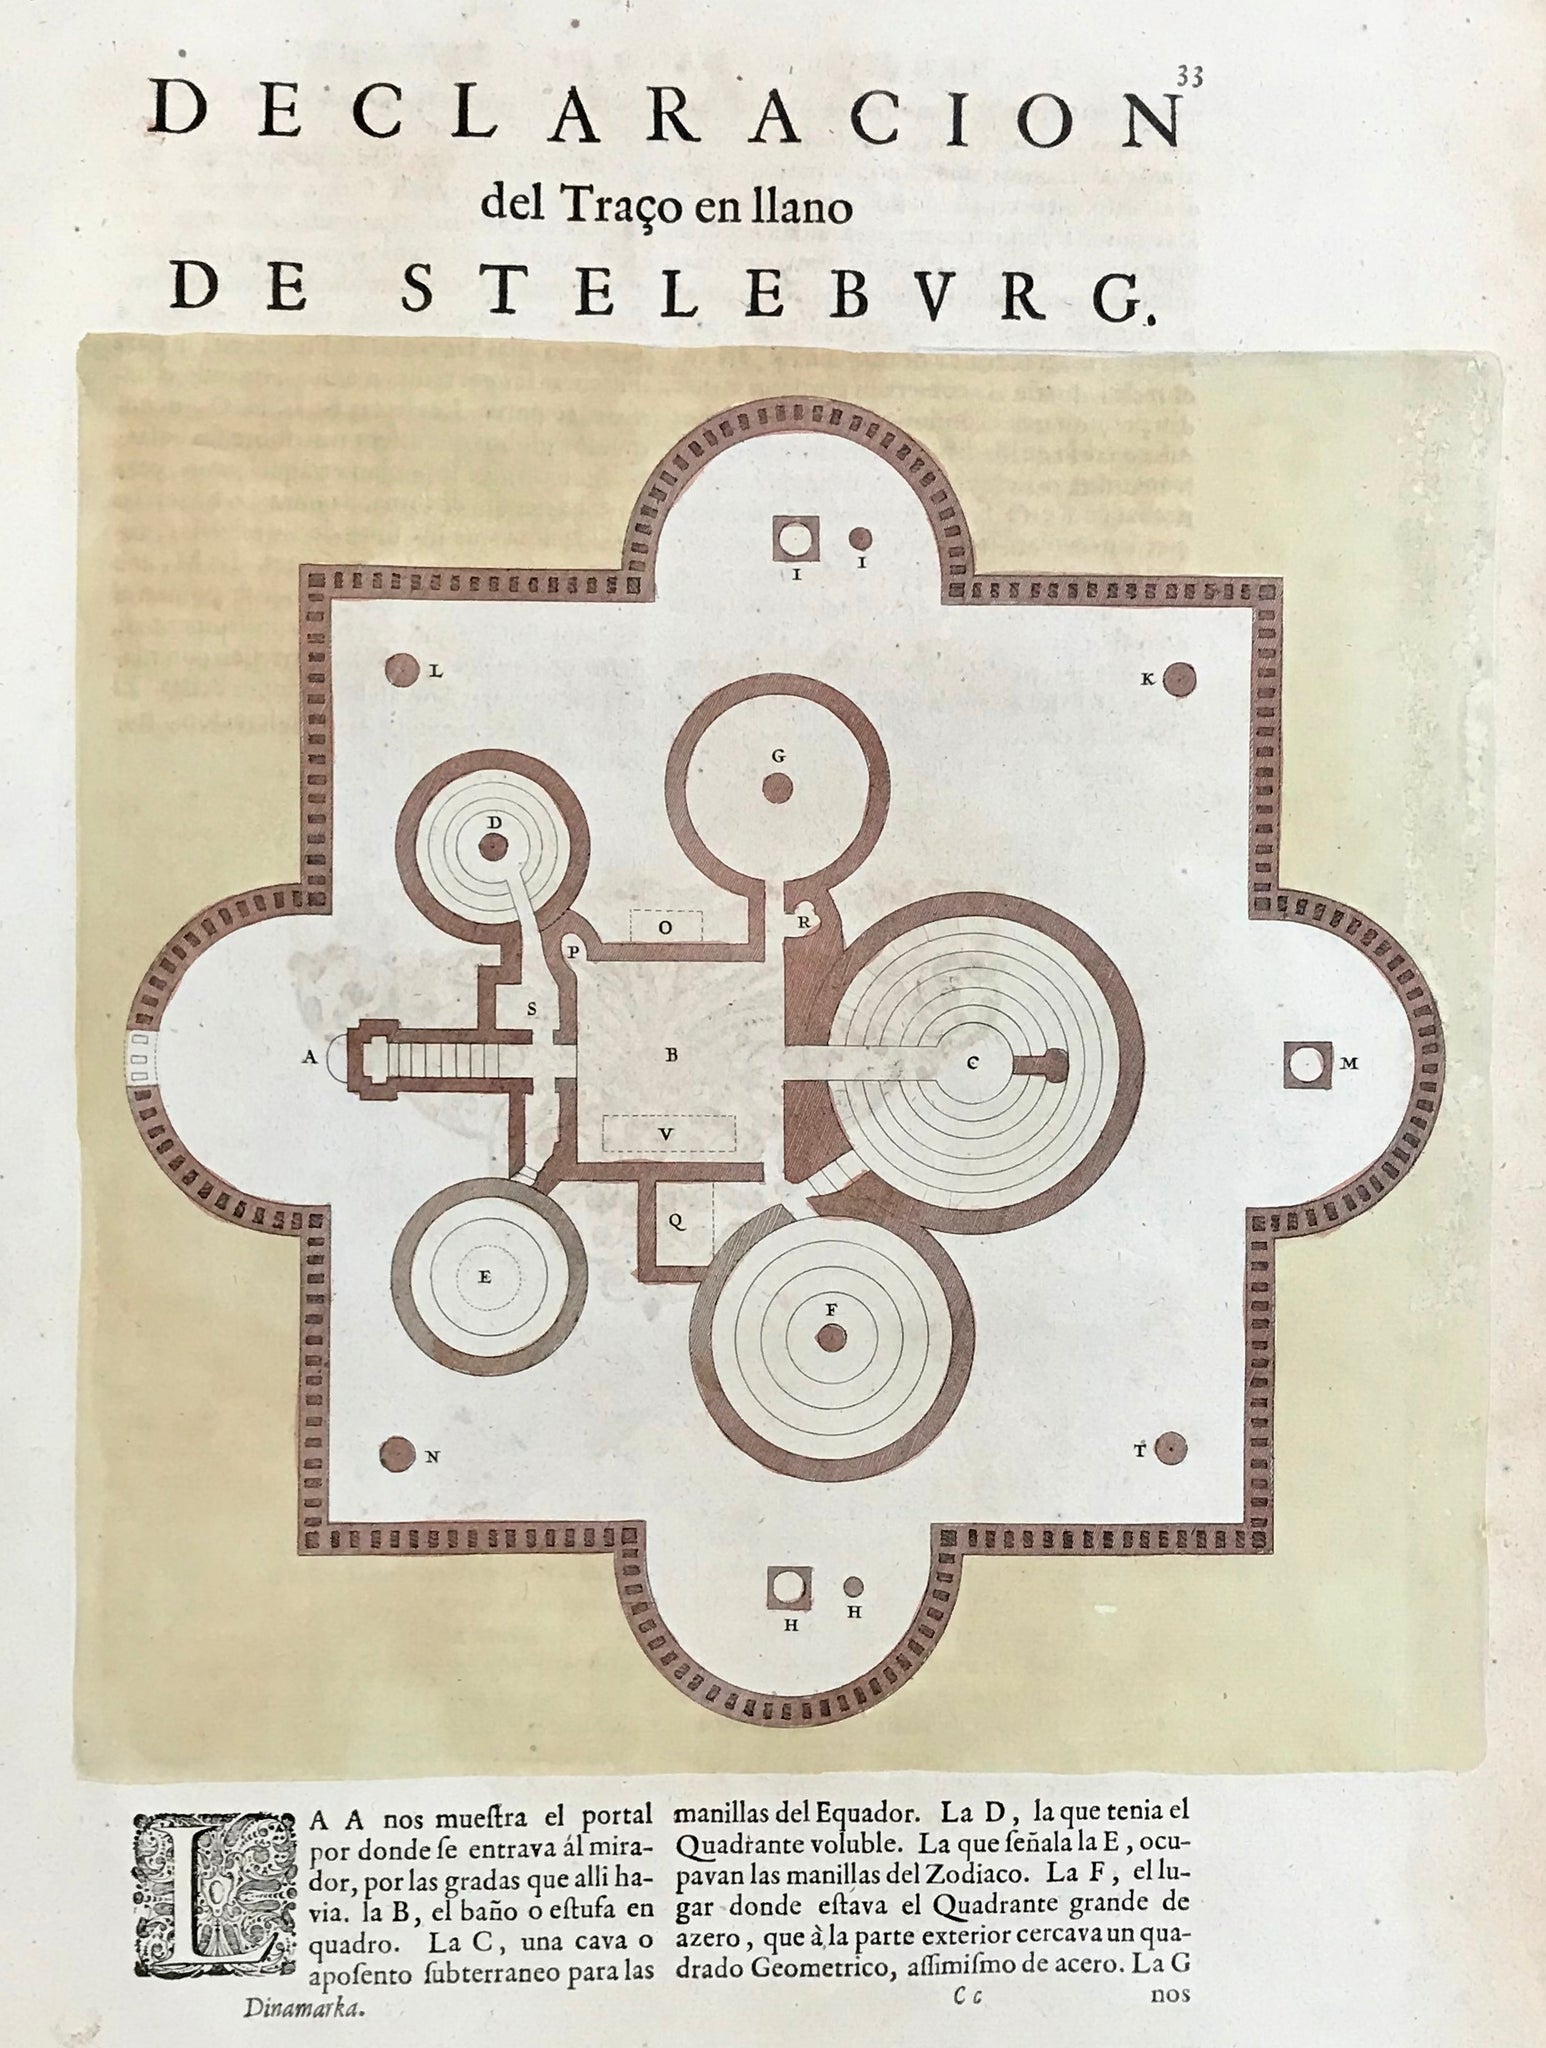 Declaracion del Traco en llano de Steleburg.  Copperetching by Joan Blaeu (1599 - 1673) in original hand coloring (2 tones of brown).  Plan of Steleburg, Tycho Brahe's (1546 - 1601), Danish astronomer, astrologer and alchemist, research institute on the island of Hven (belongs to Sweden).  Clean, well preserved. Ground color a little flaked off on right side. Print on backside is Spanish (showing through slightly, but not disturbingly).  26.5 x 26.5 cm (10.4 x 10.4")